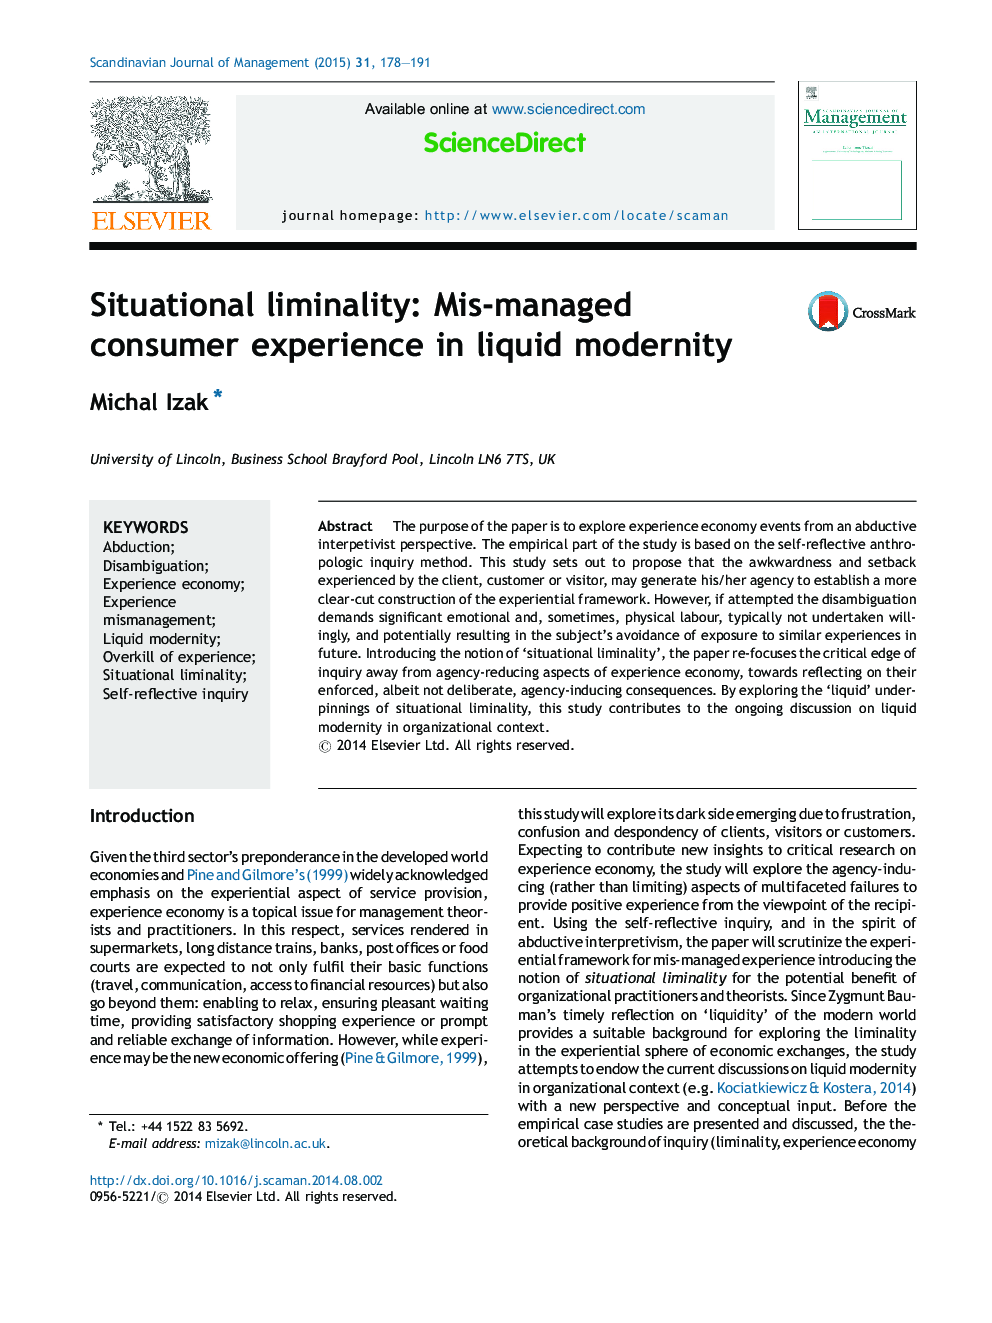 Situational liminality: Mis-managed consumer experience in liquid modernity